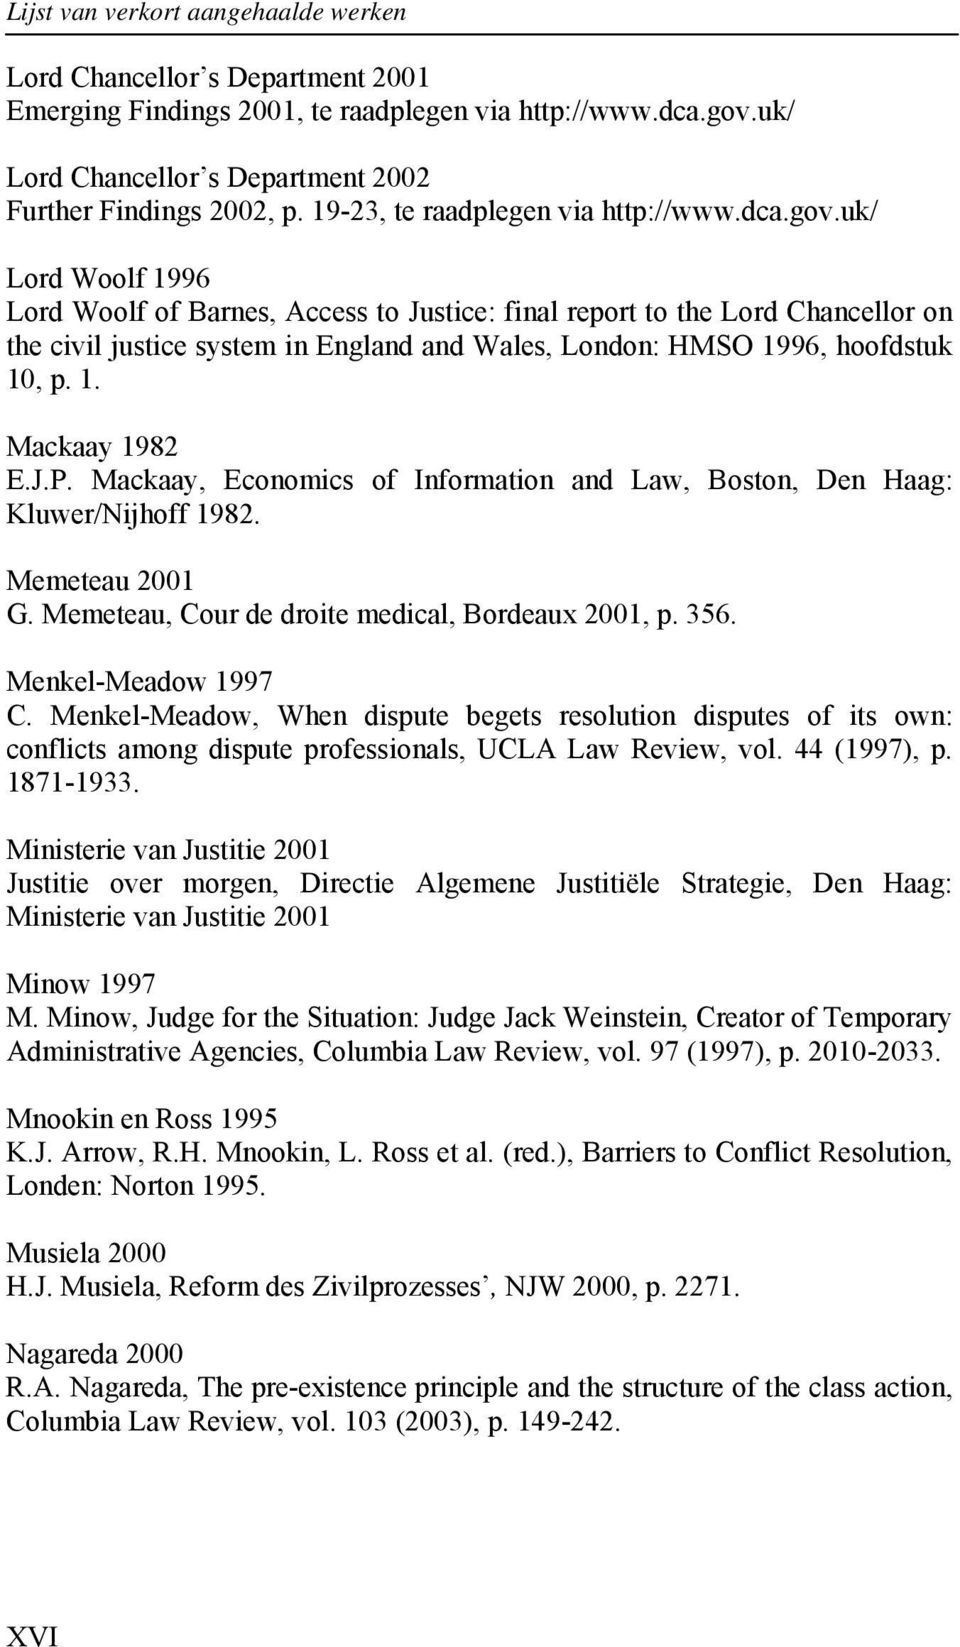 uk/ Lord Woolf 1996 Lord Woolf of Barnes, Access to Justice: final report to the Lord Chancellor on the civil justice system in England and Wales, London: HMSO 1996, hoofdstuk 10, p. 1. Mackaay 1982 E.